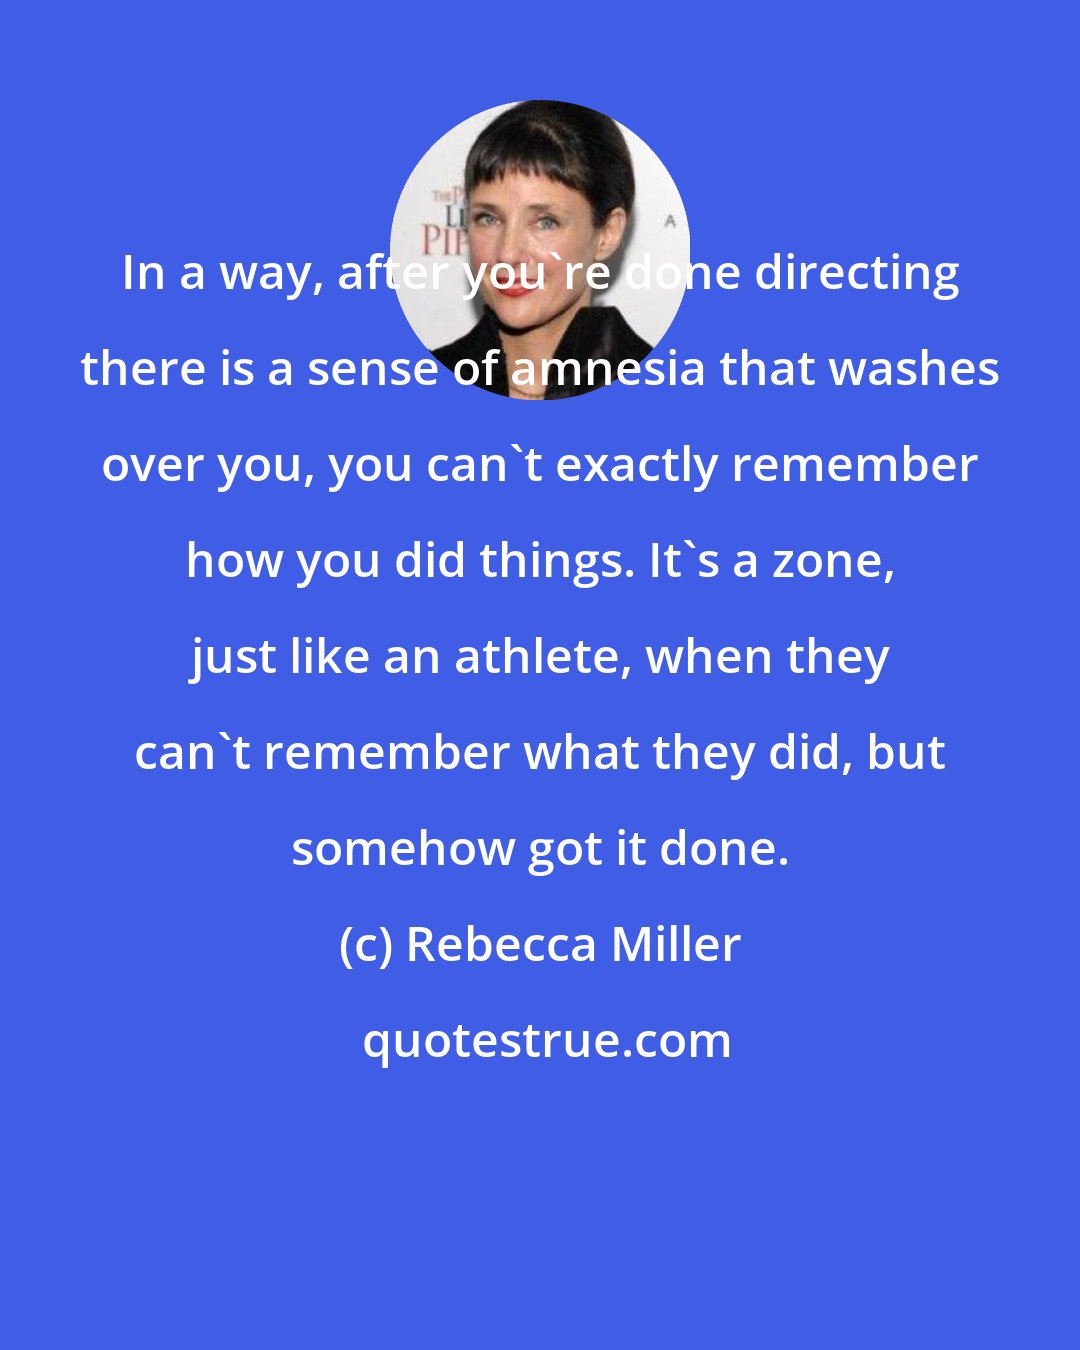 Rebecca Miller: In a way, after you're done directing there is a sense of amnesia that washes over you, you can't exactly remember how you did things. It's a zone, just like an athlete, when they can't remember what they did, but somehow got it done.